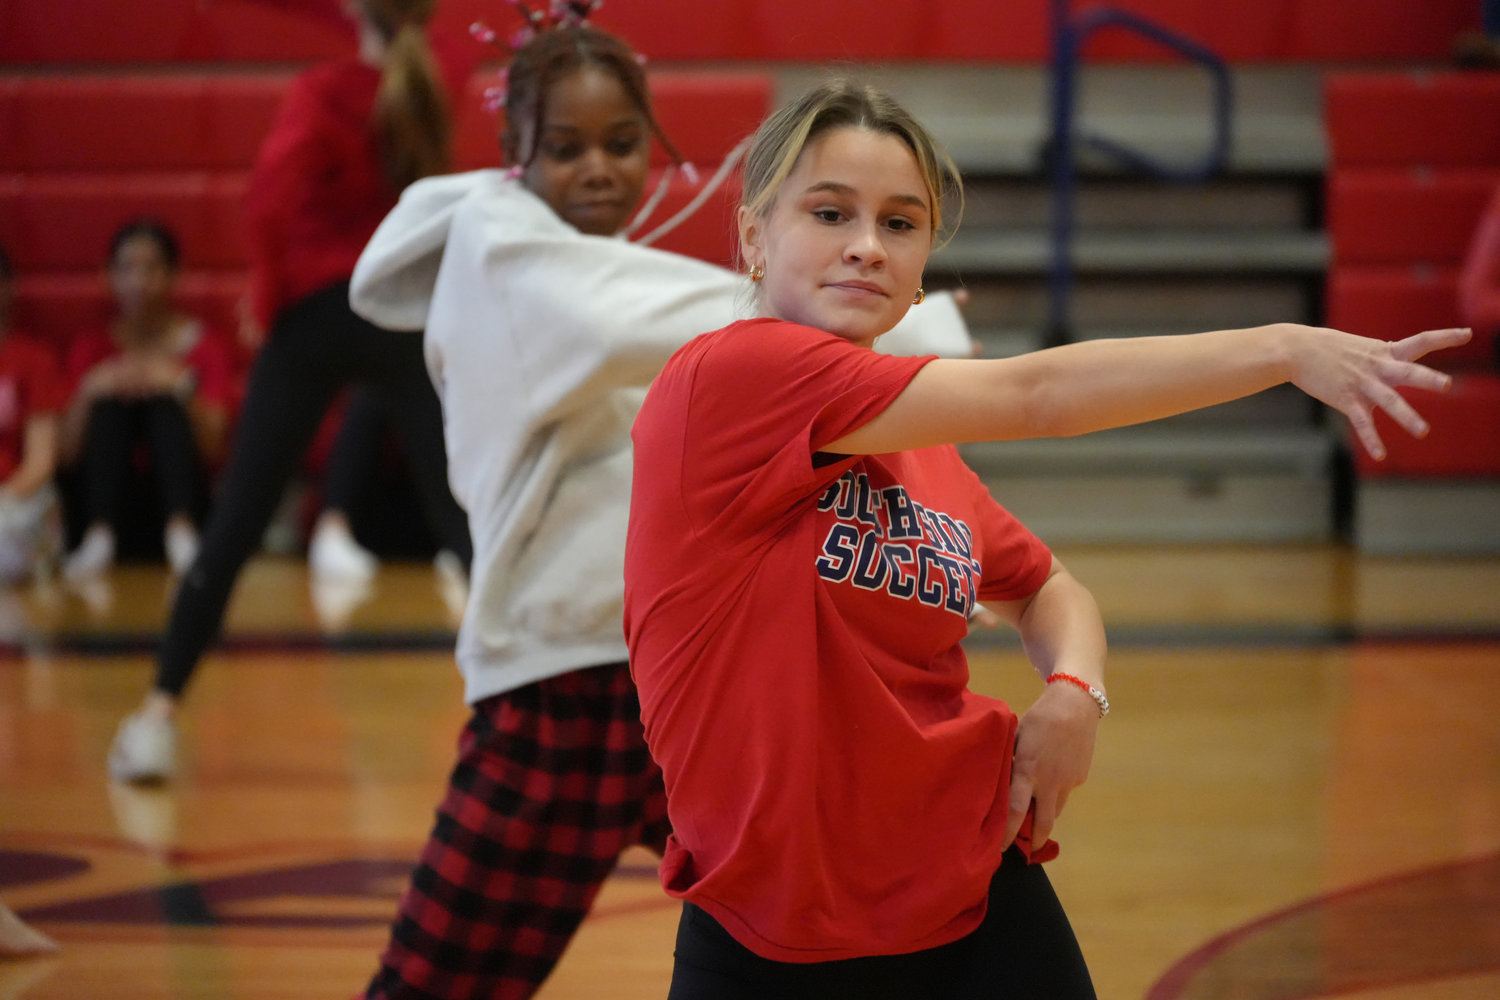 Sarah Schafer and the Red team rehearse their dance moves in preparation for the big competition